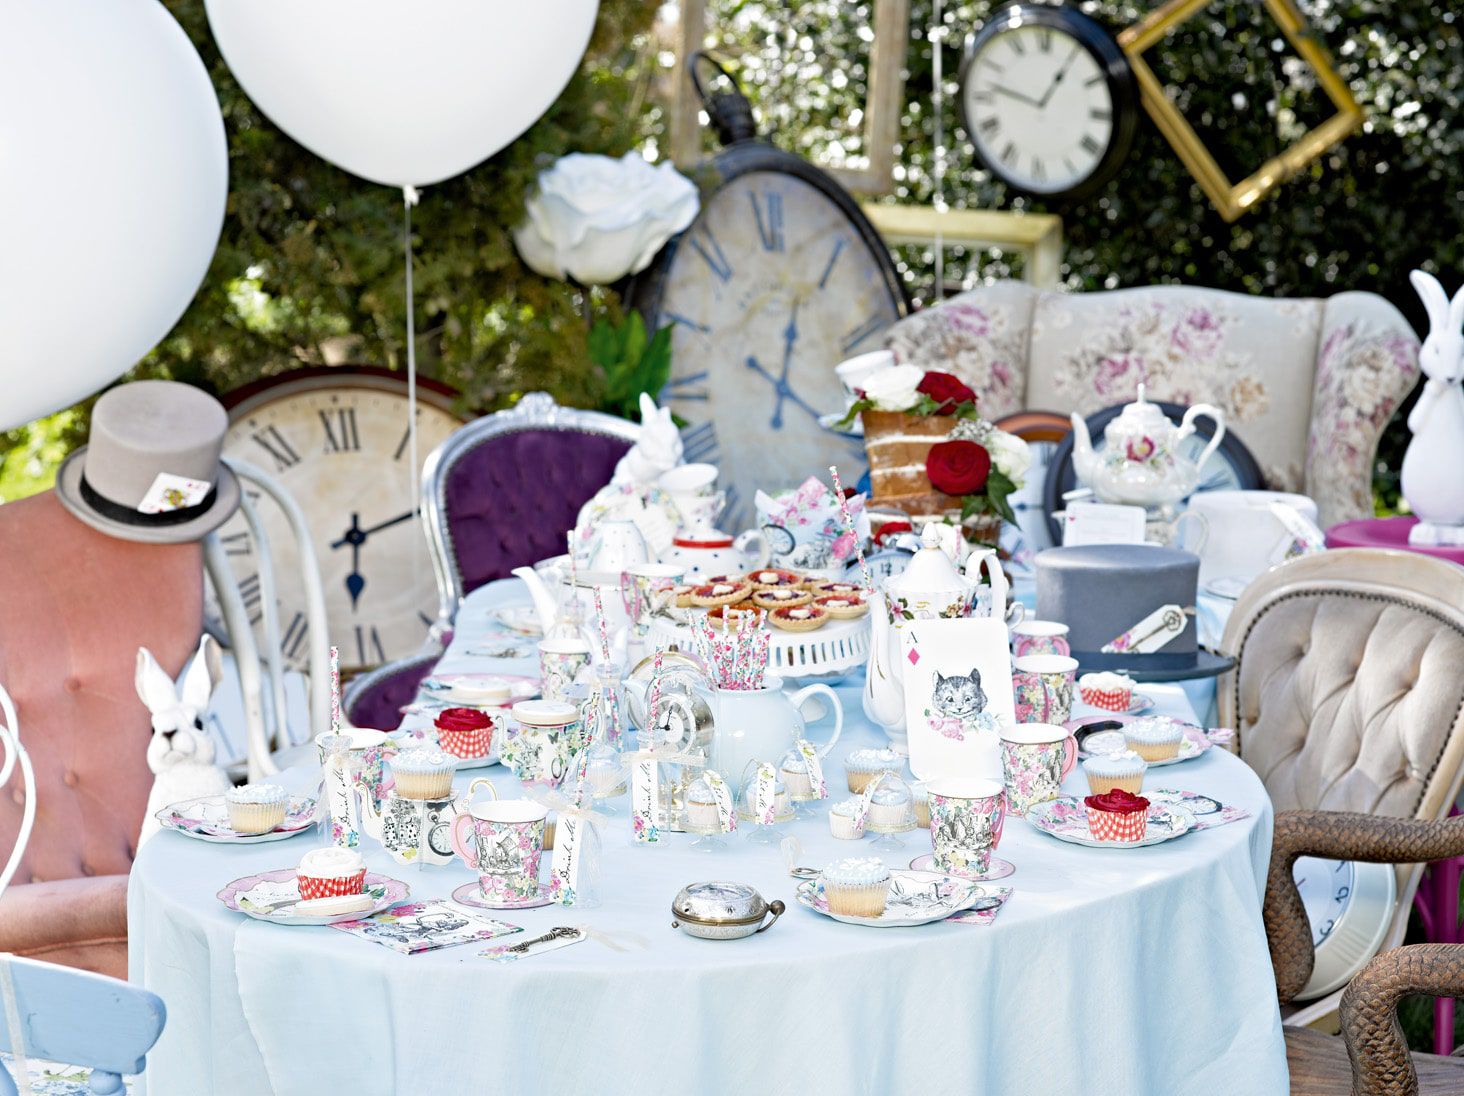 Alice in Wonderland Party Supplies for 10 People Birthday